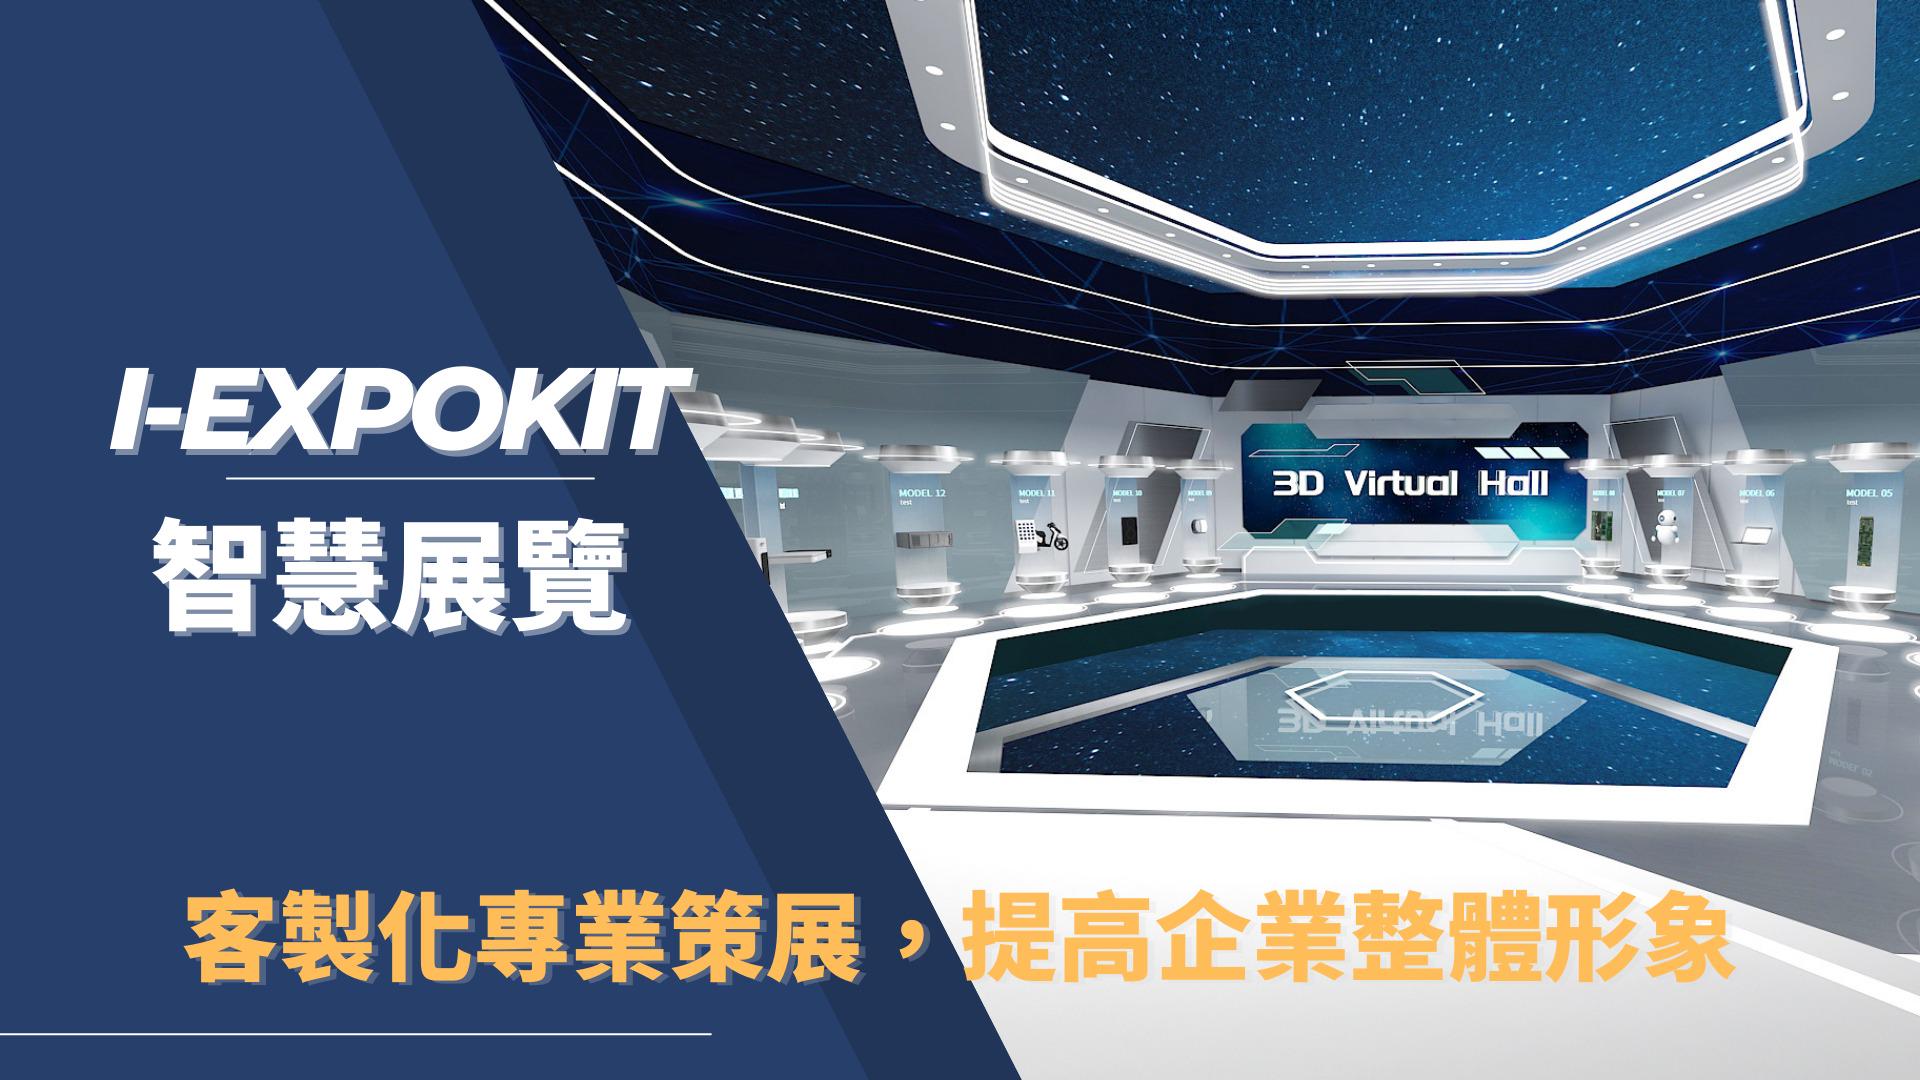 i-ExpoKit, Online Exhibition, ITRI, Innovation Expo, Taiwan Innotech Expo 2021, King One Design